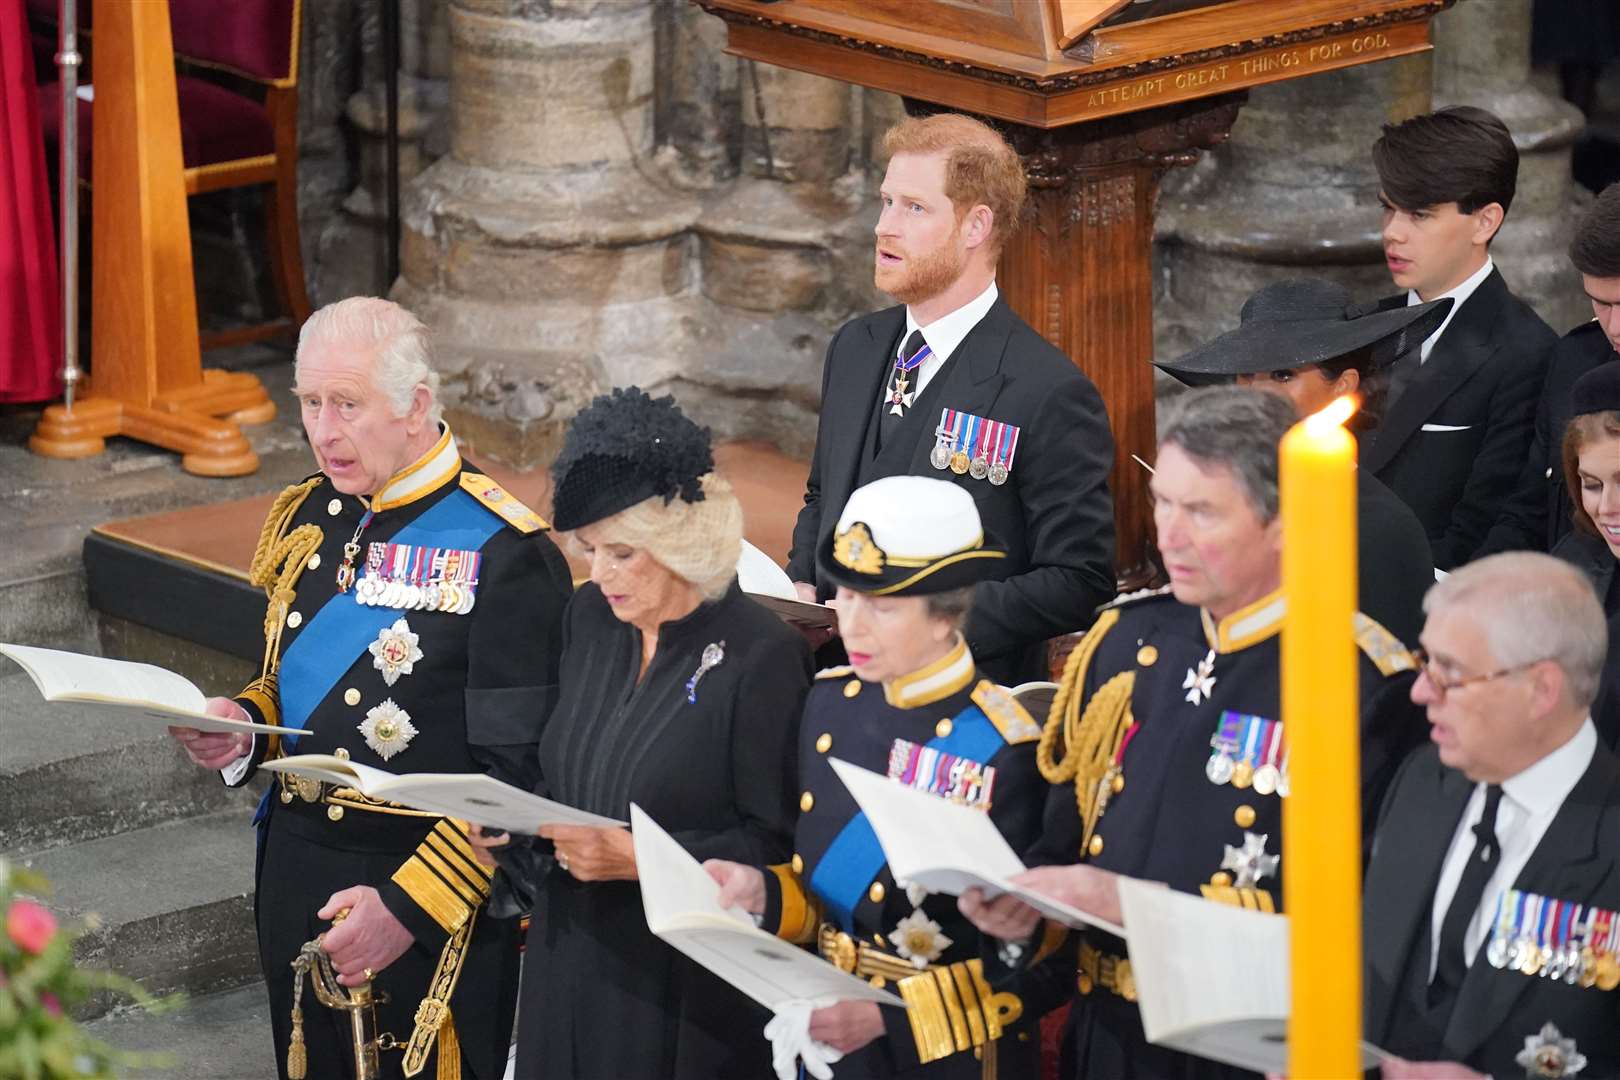 The Duke of Sussex (second row) at the late Queen’s funeral (Dominic Lipinski/PA)